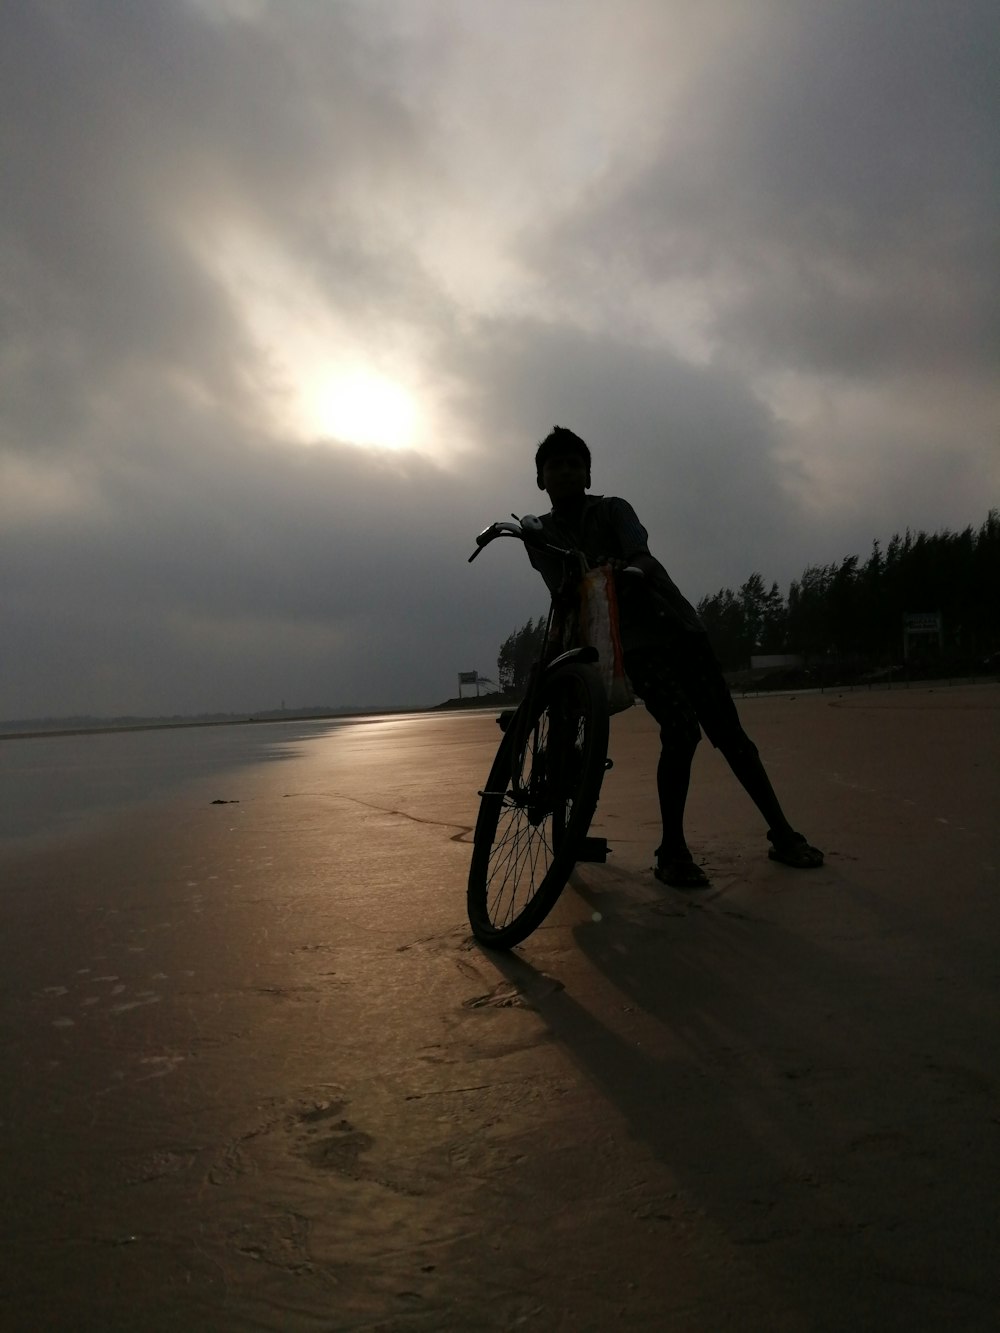 silhouette of person standing beside mountain bike near brown sand during daytime